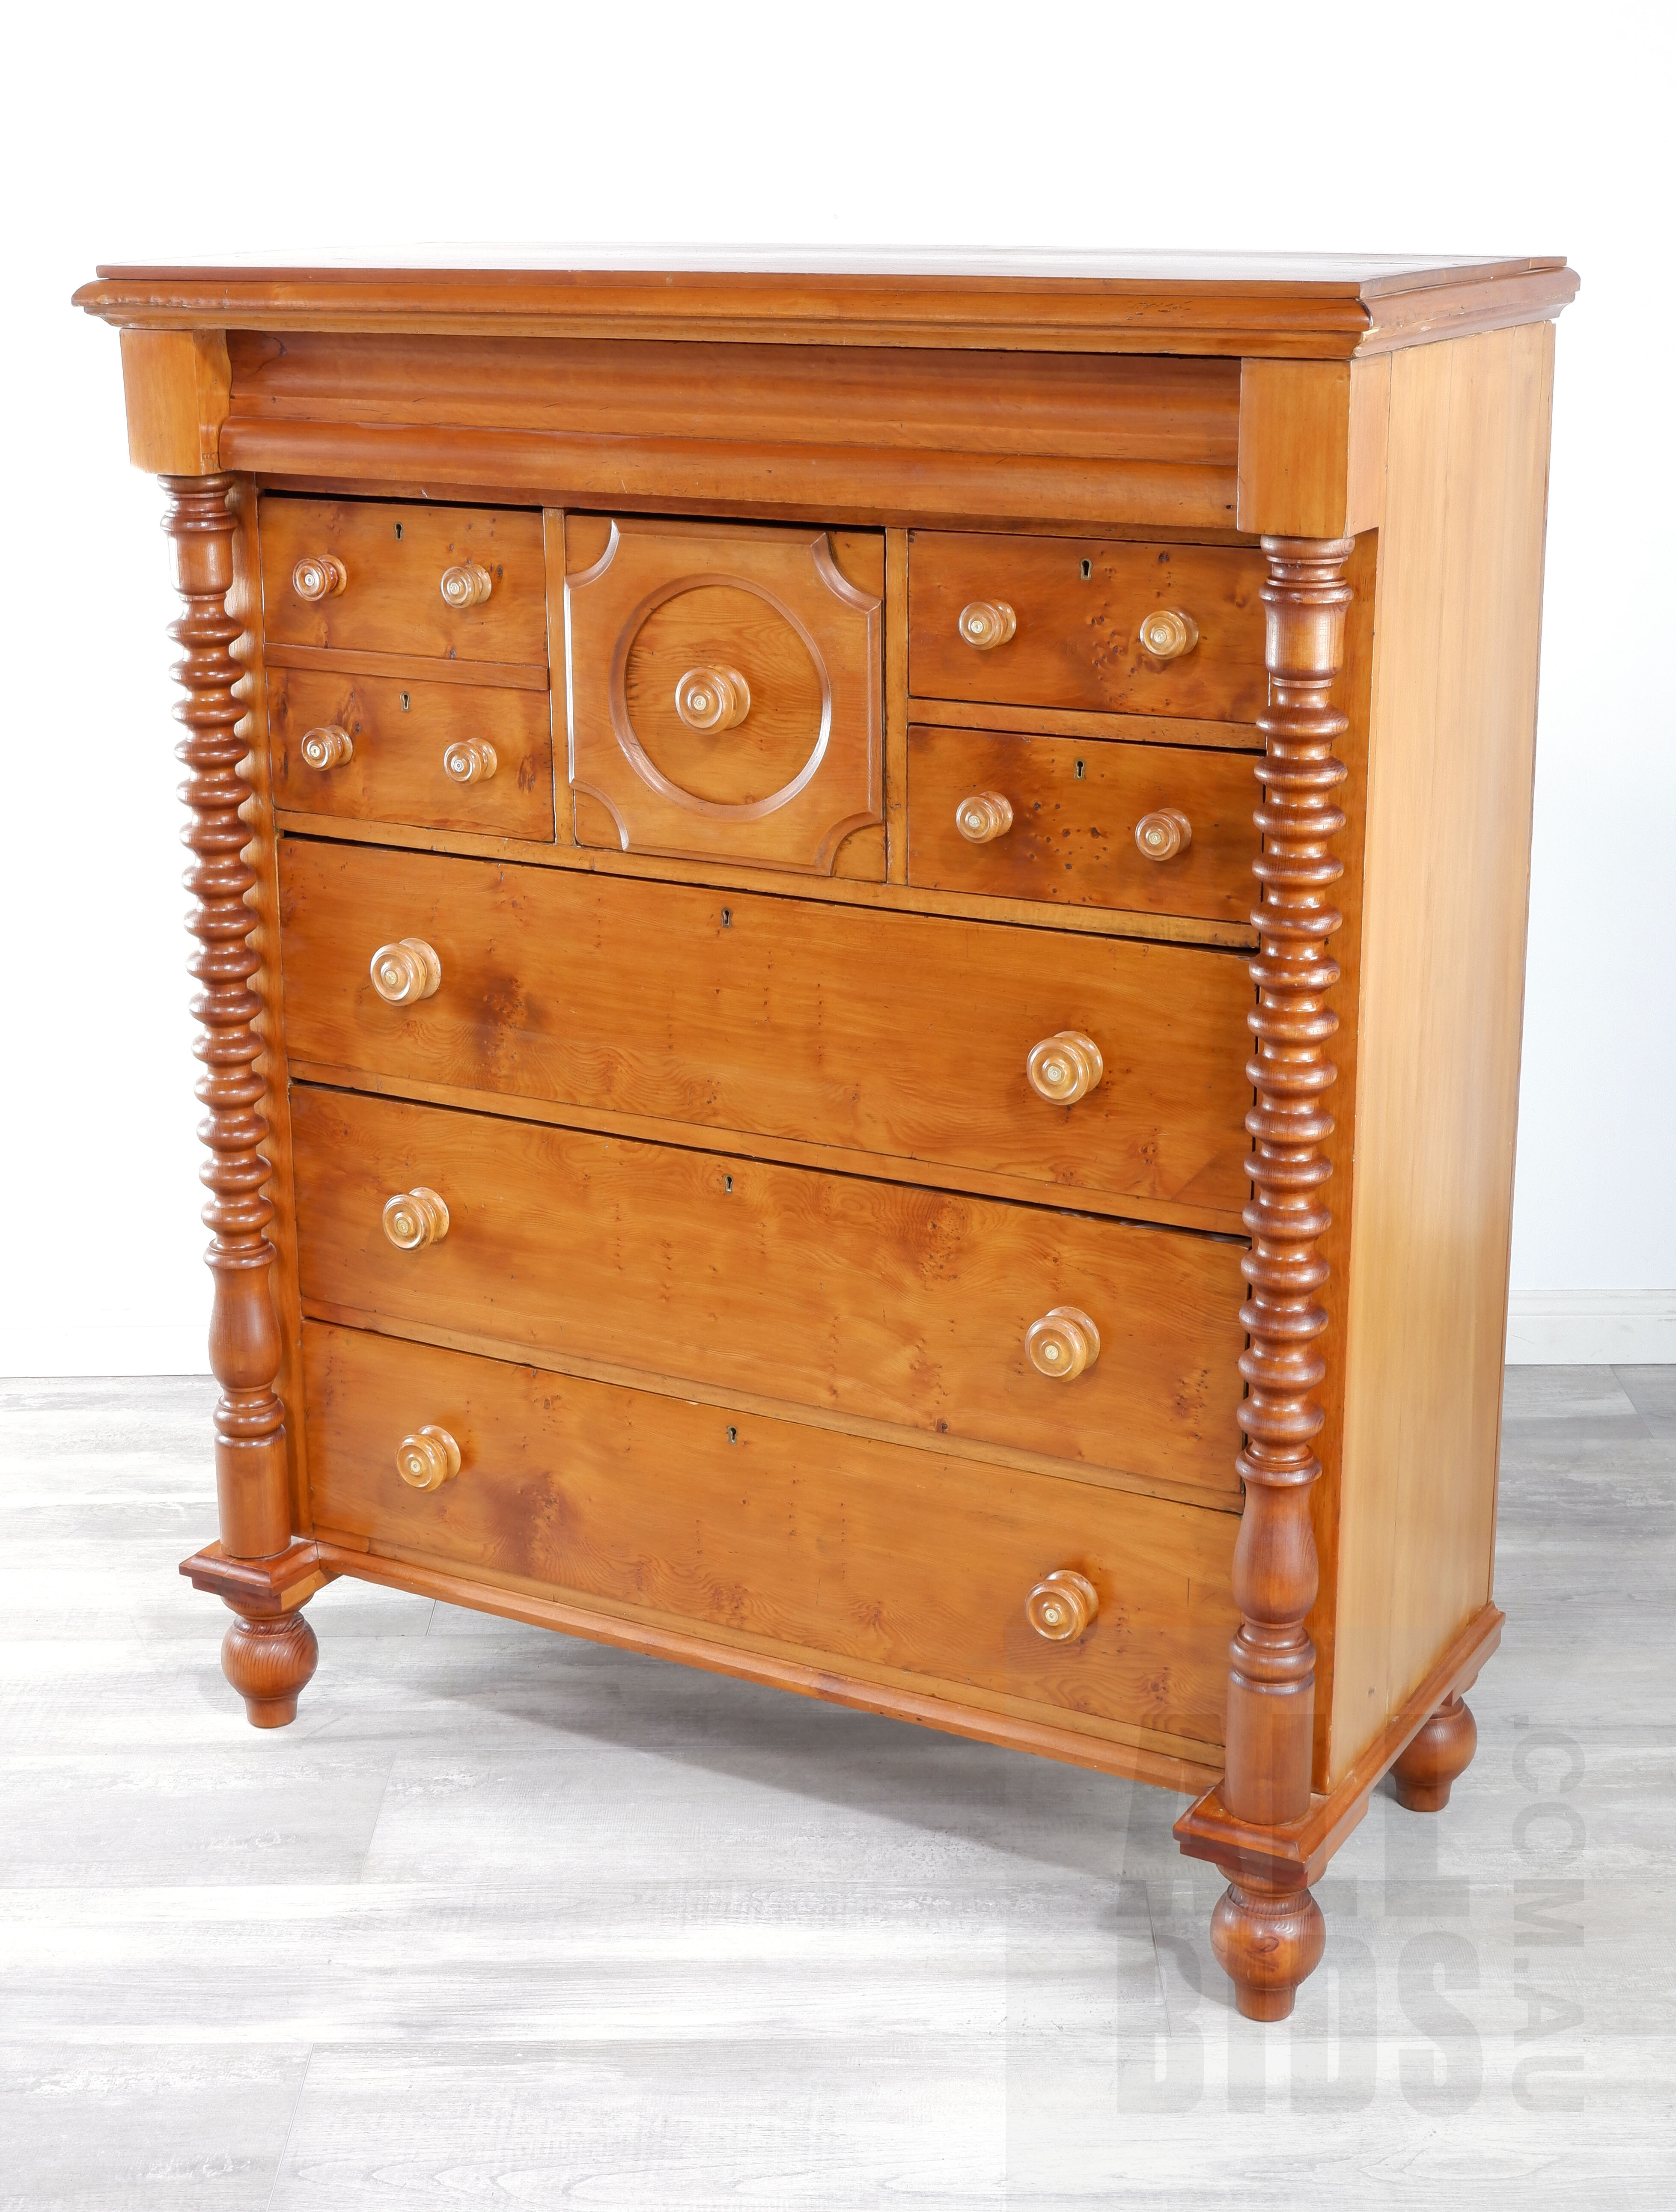 'Antique Australian Huon Pine Chest of Drawers, Late 19th Century'